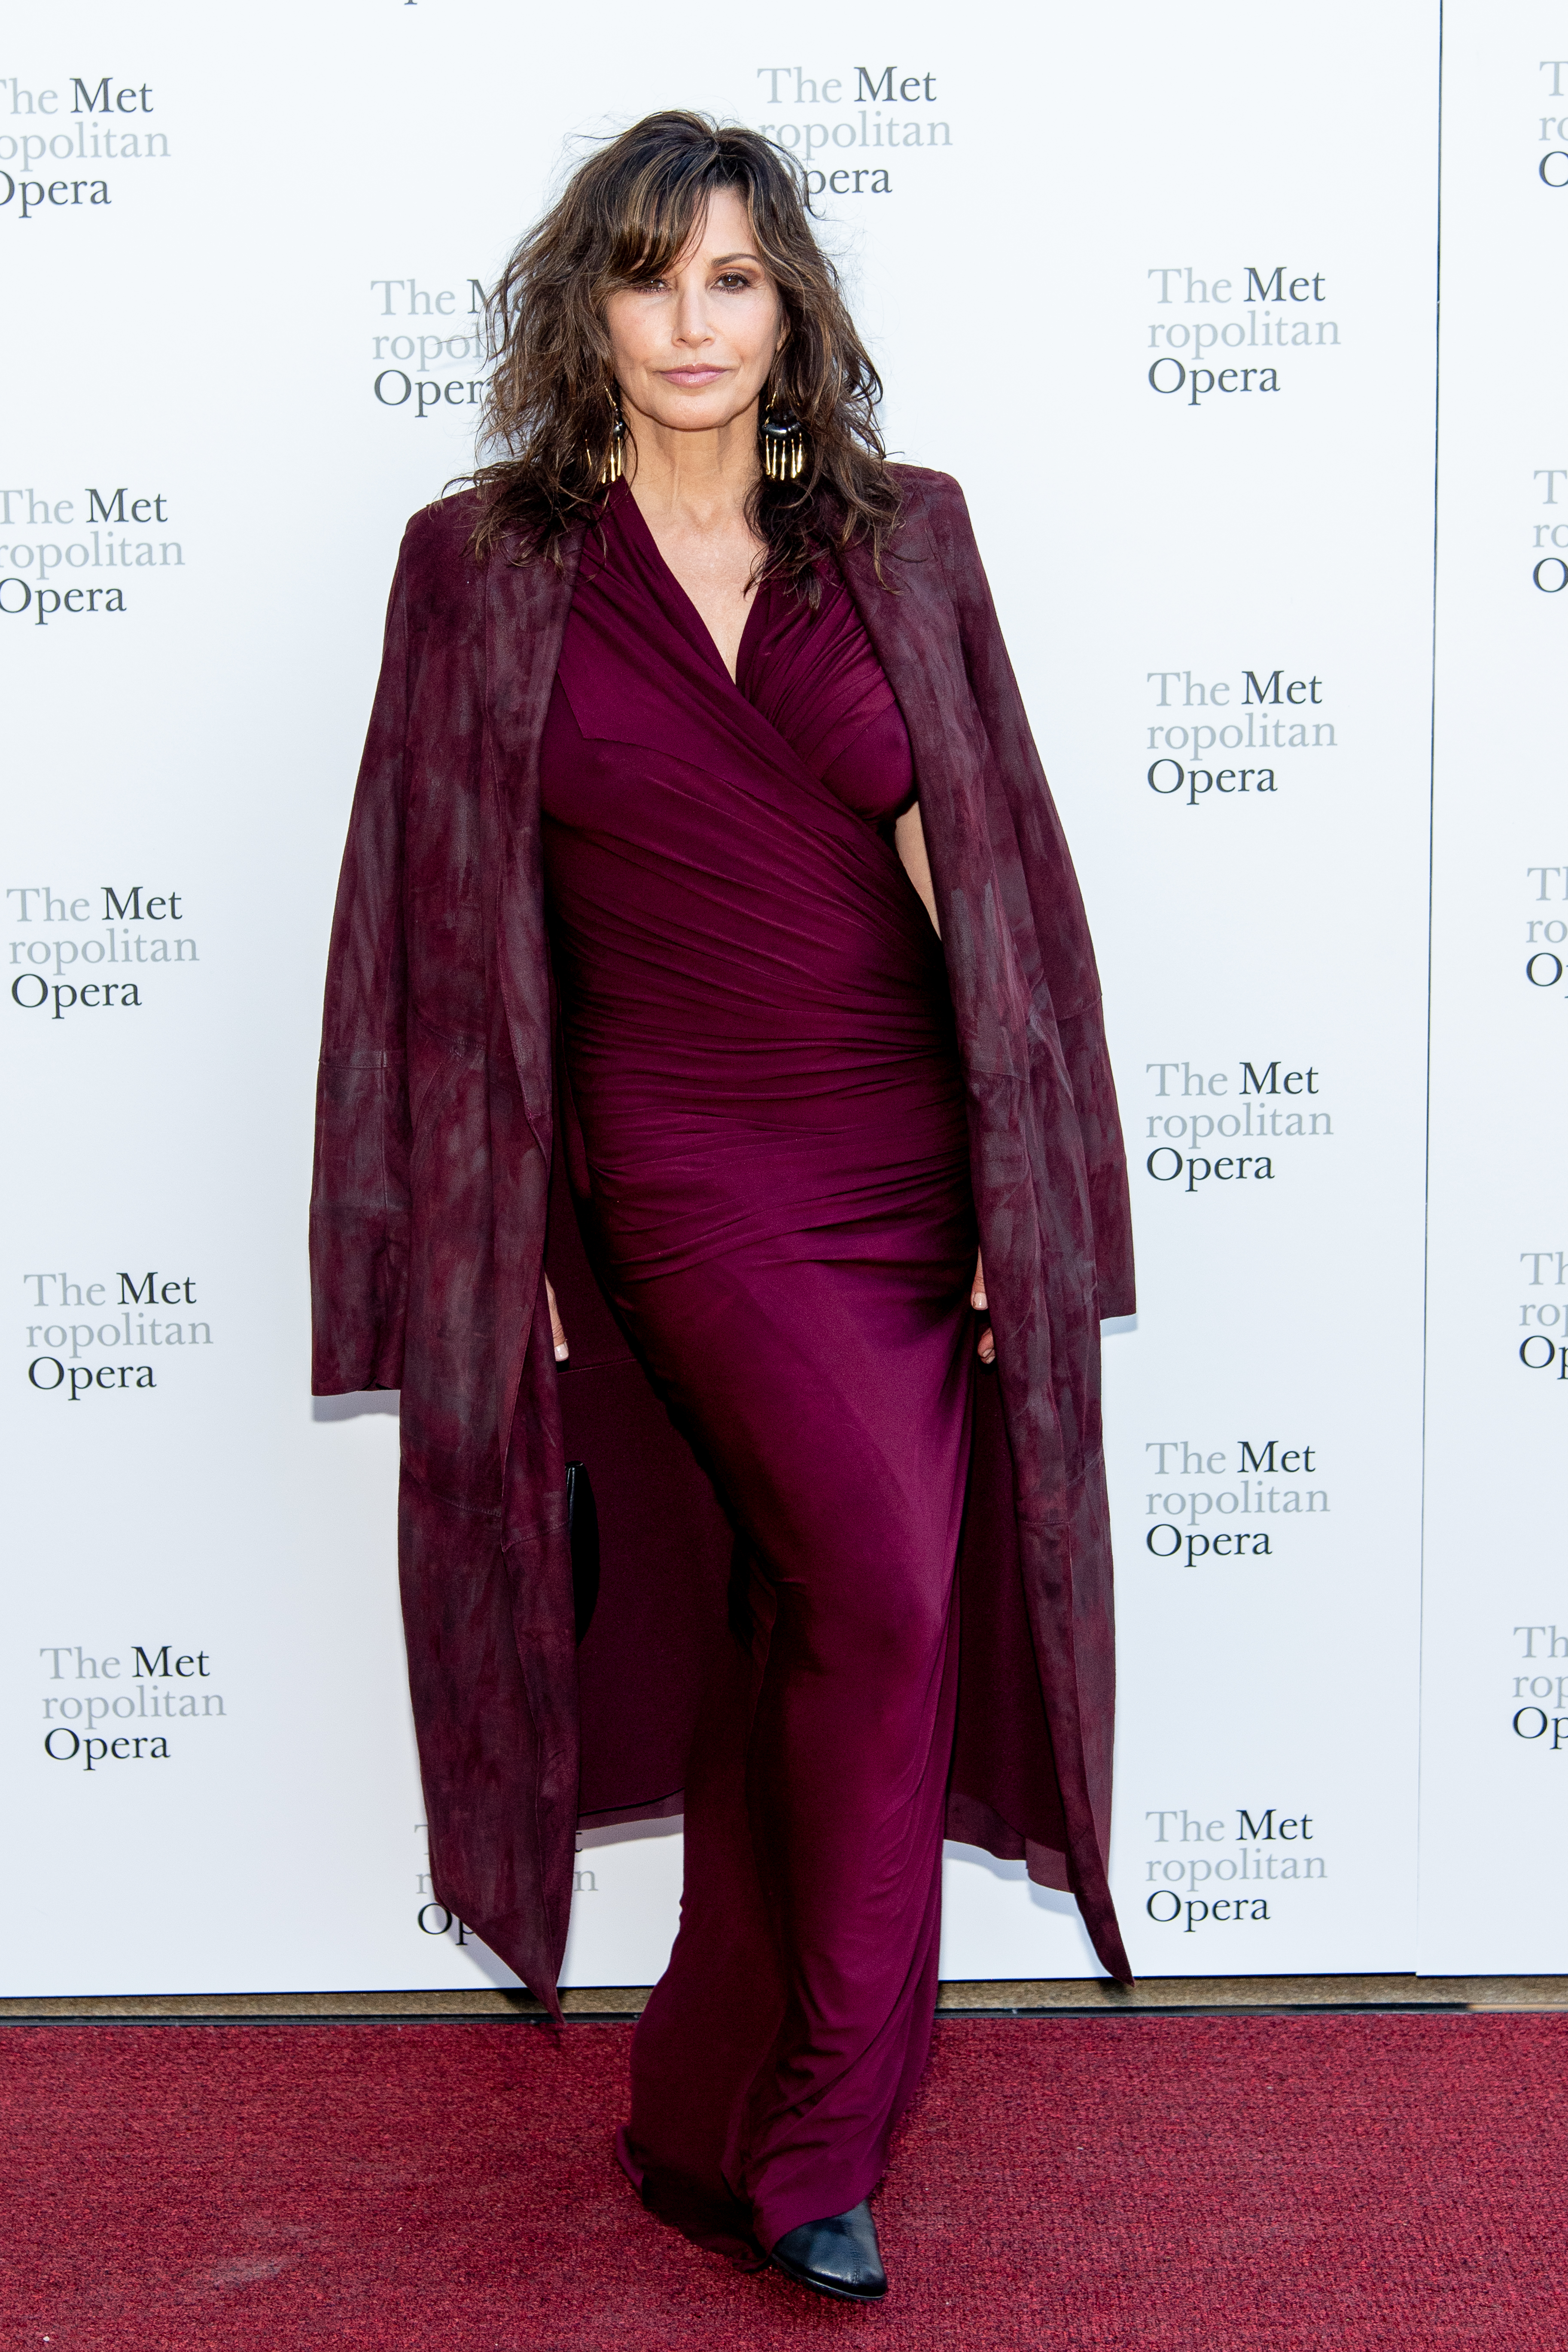 Gina Gershon at the opening night of "Medea" on September 27, 2022, in New York | Source: Getty Images